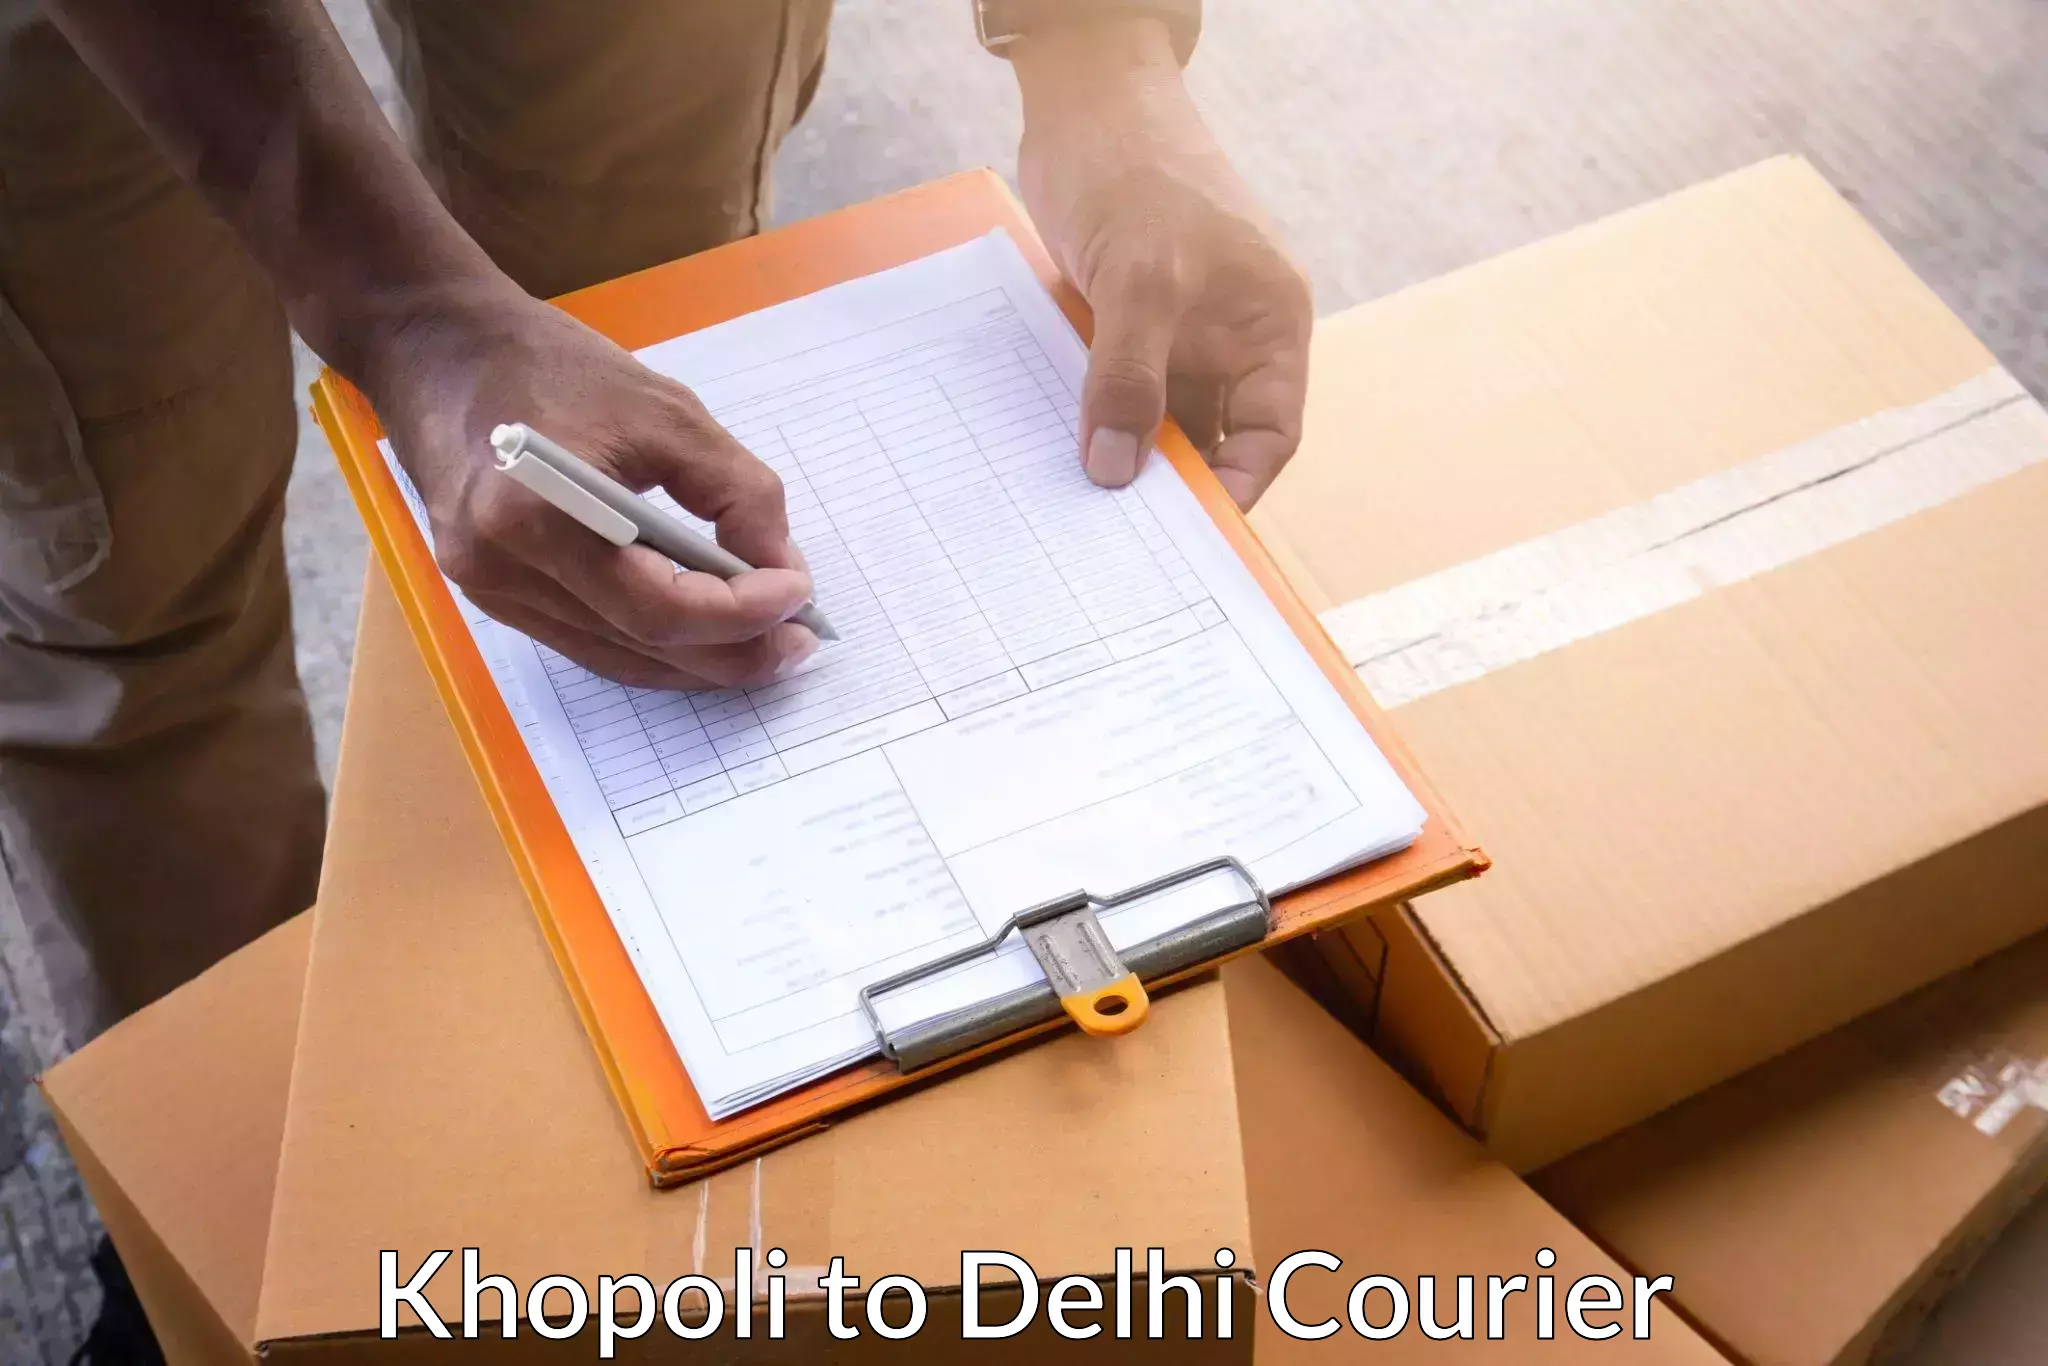 Package delivery network Khopoli to NCR